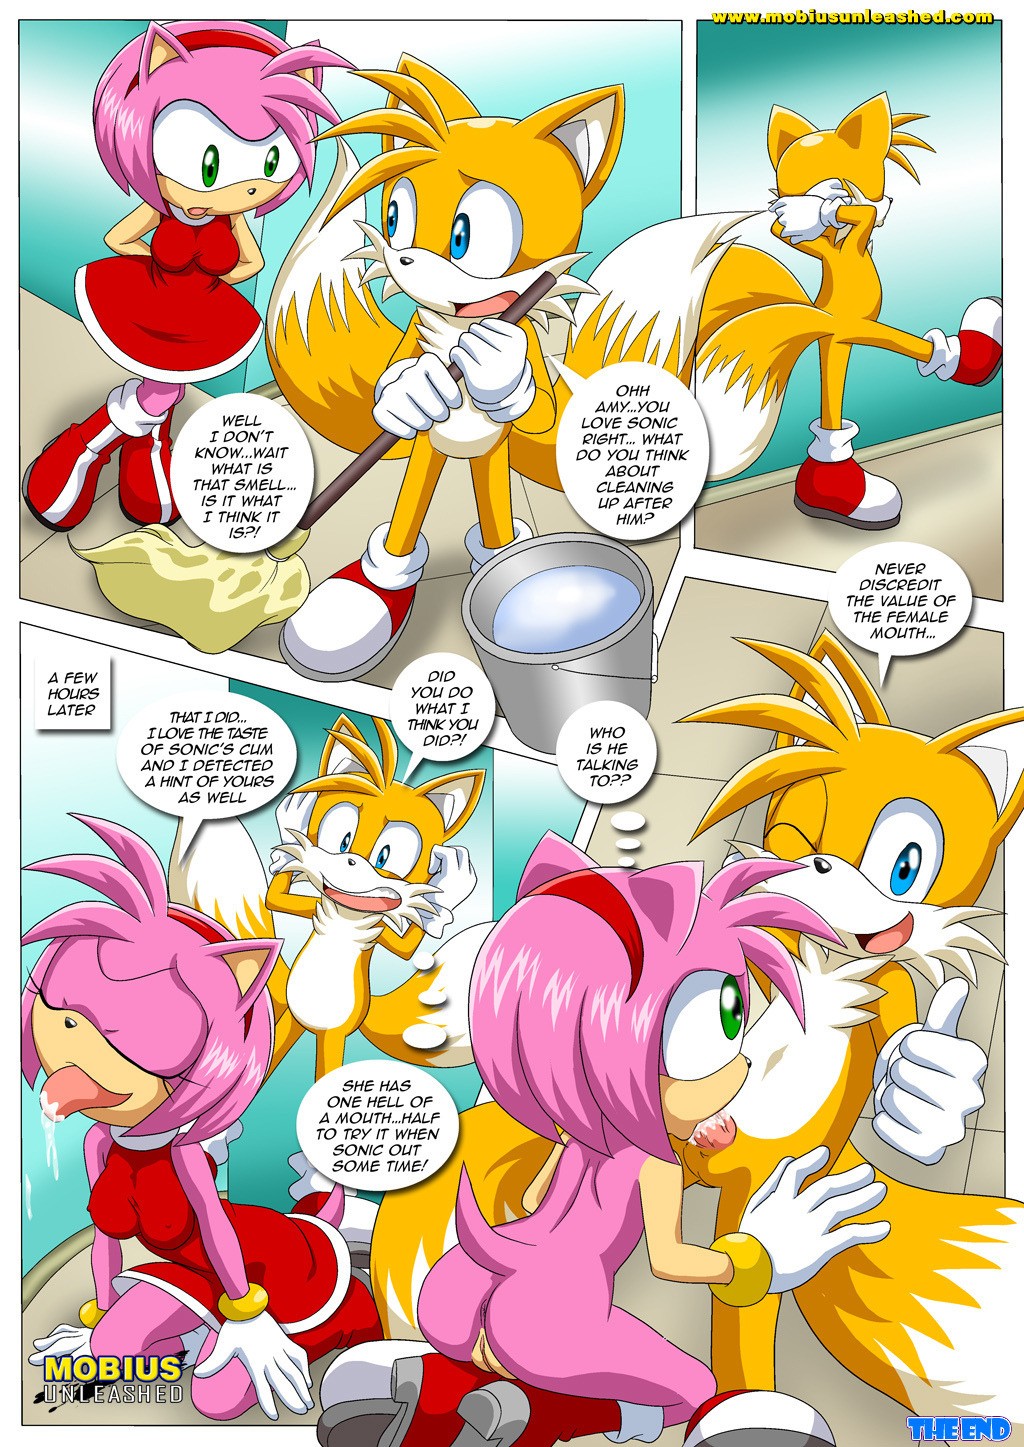 (sonic) Tails Tinkerings furry yiff M/f/f